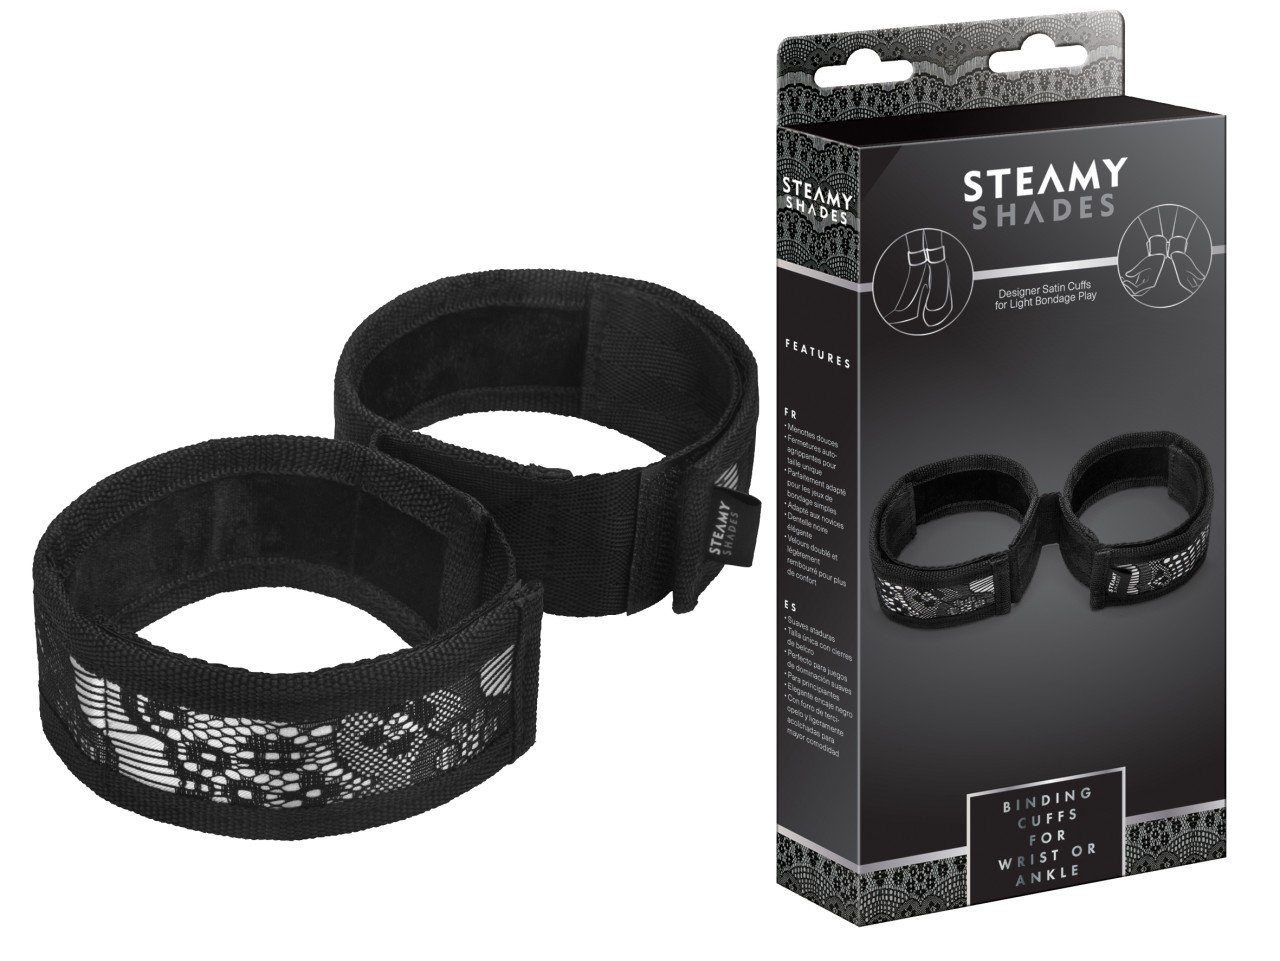 STEAMY SHADES Bondage-Set STEAMY SHADES Binding Cuffs for Wrist or Ankle